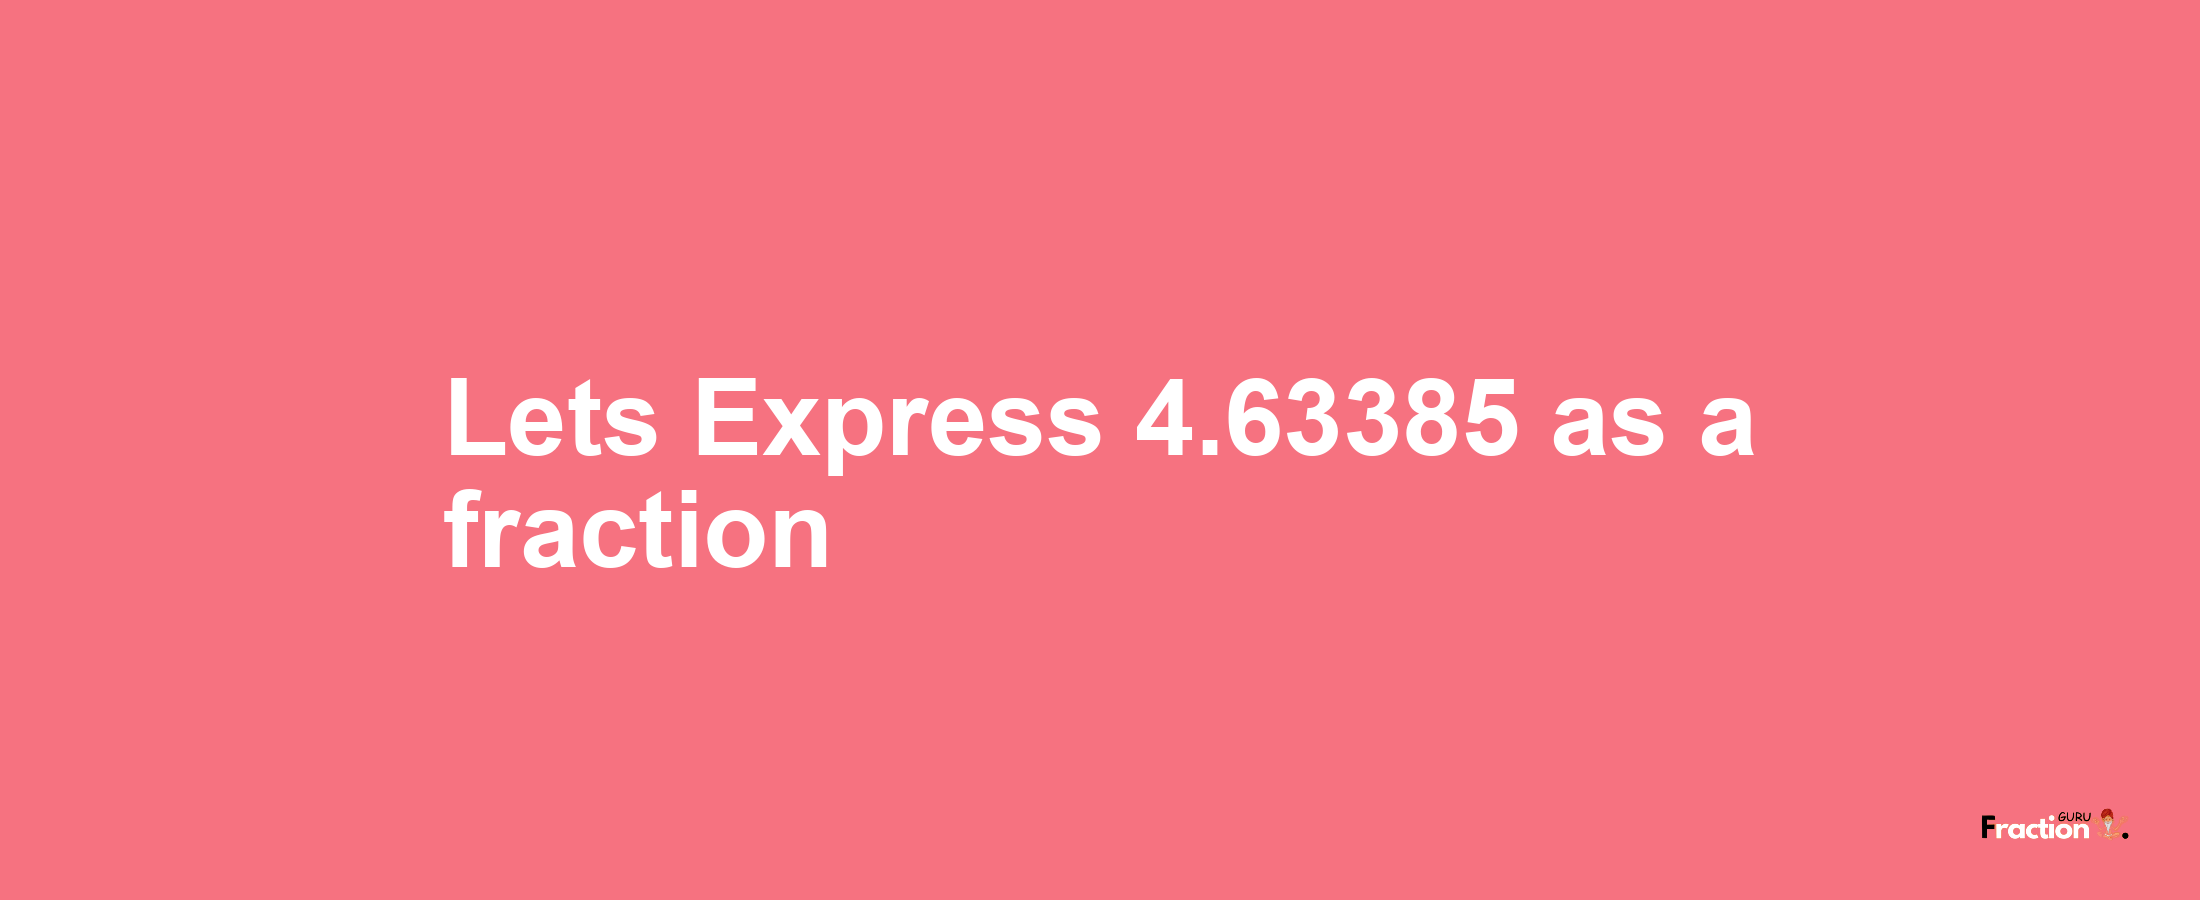 Lets Express 4.63385 as afraction